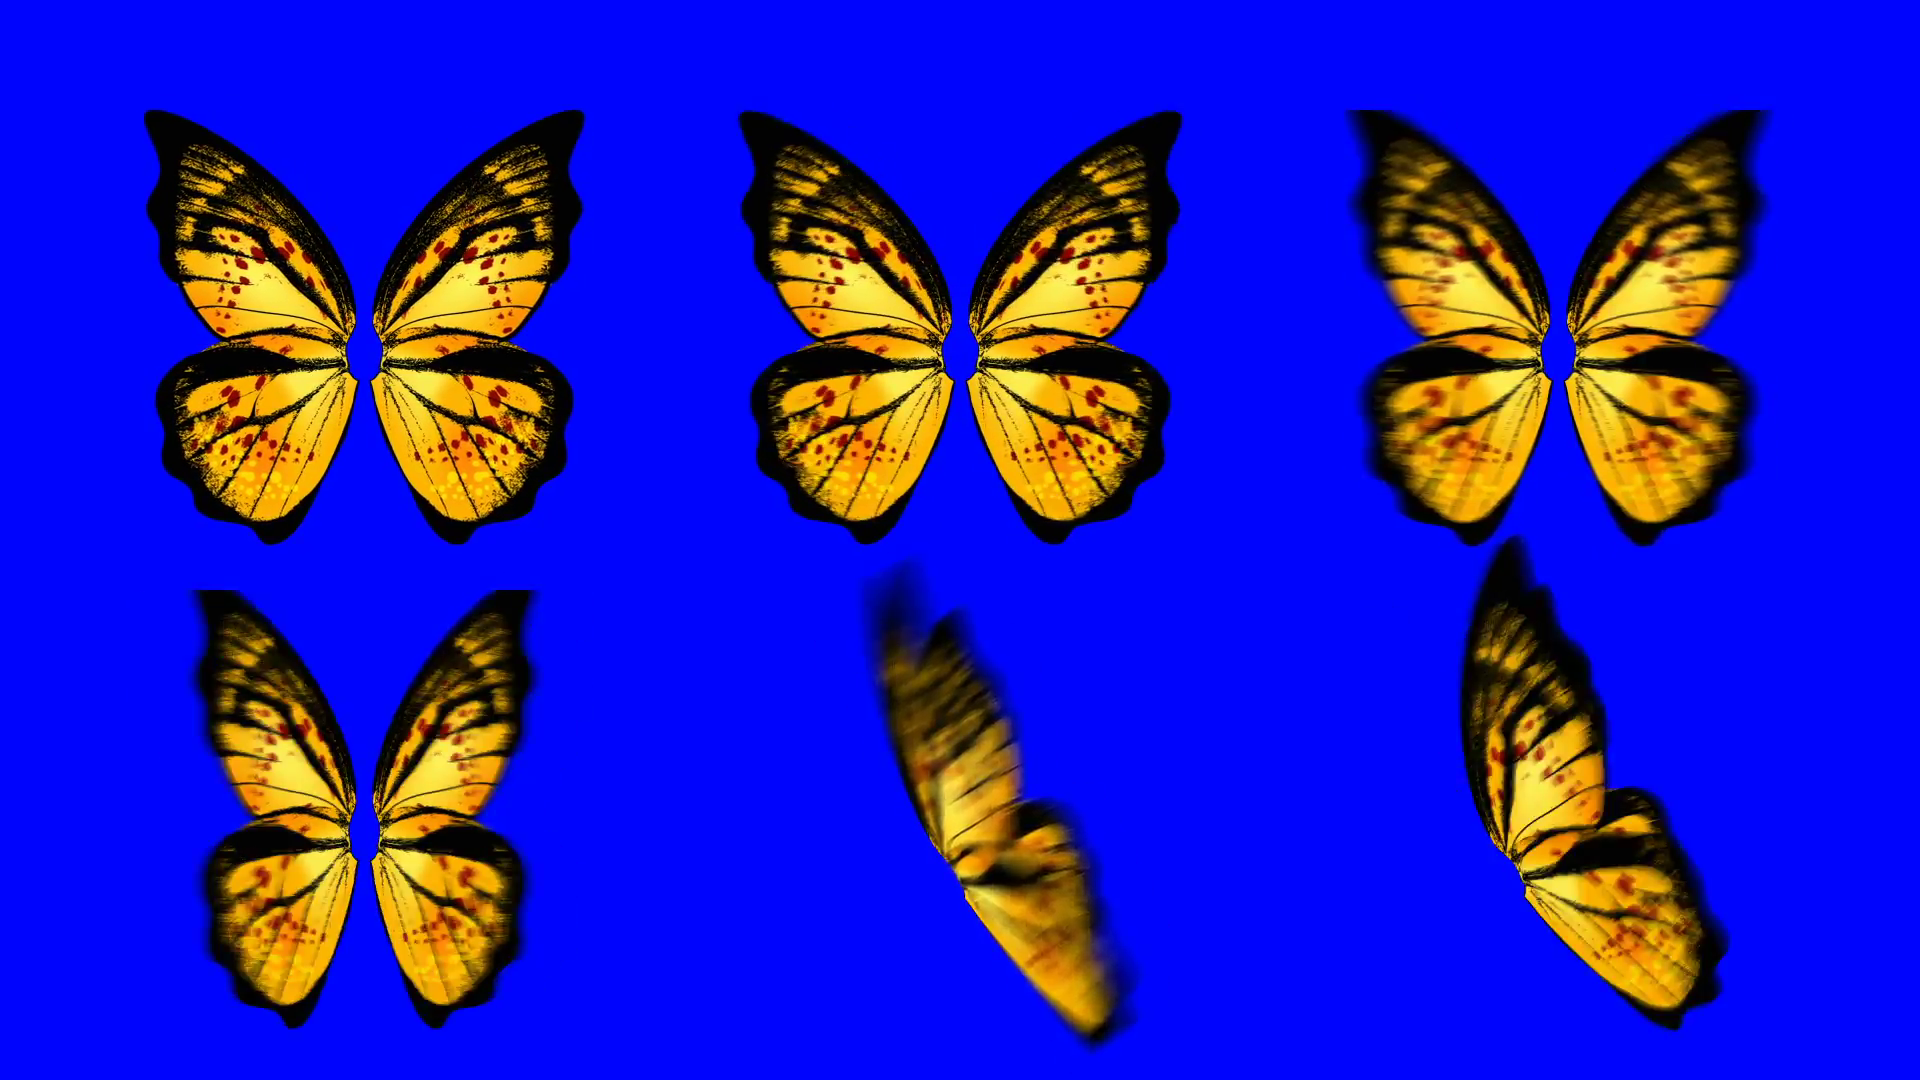 A set of Yellow Butterfly Wings Waving in Different Speed and Angles ...